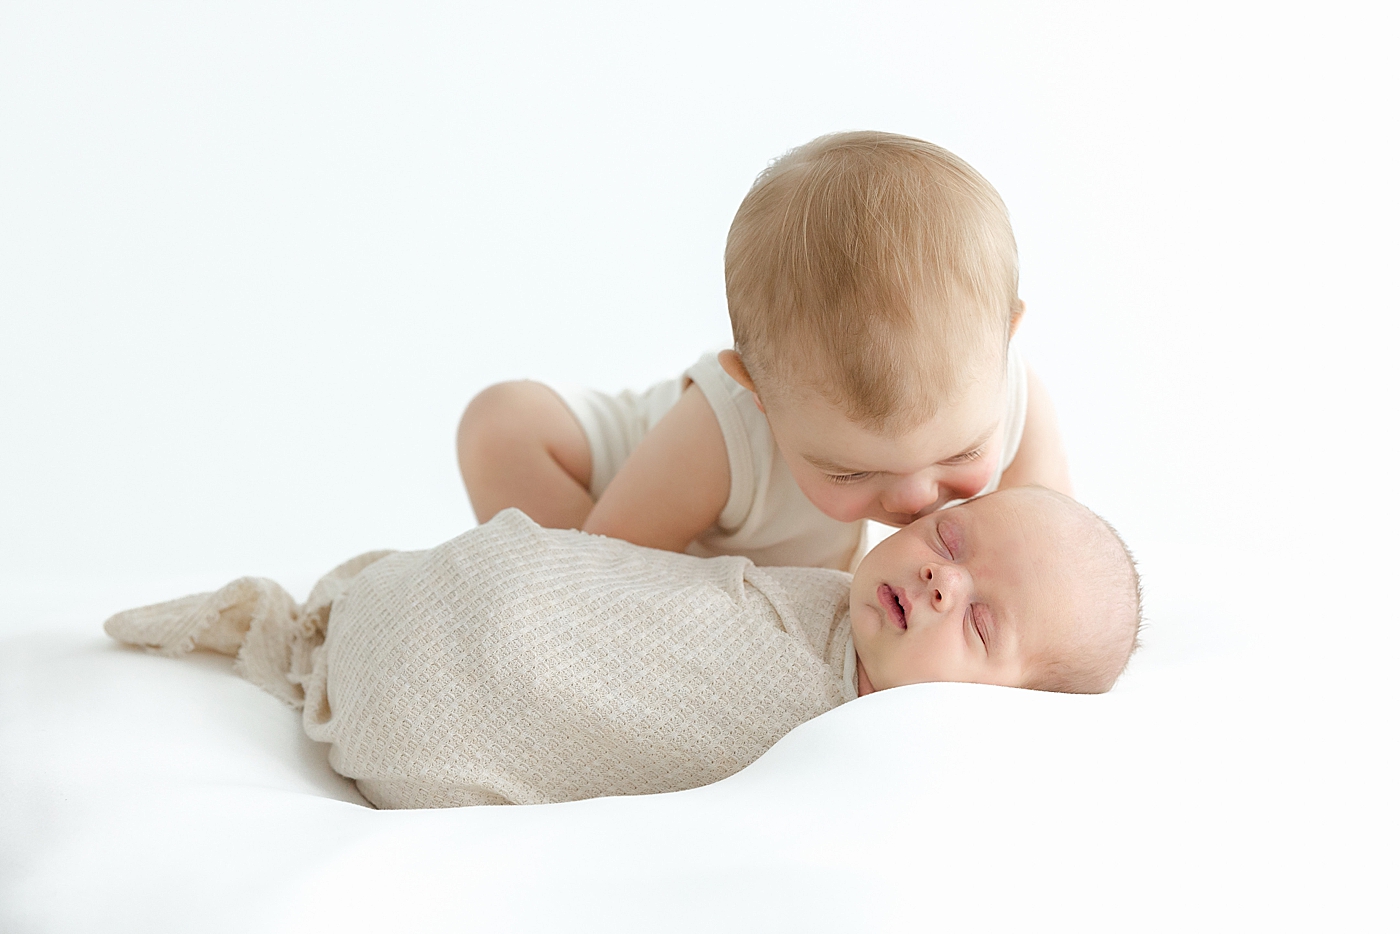  | Preparing Siblings for Newborn Sessions | Image by Sana Ahmed Photography